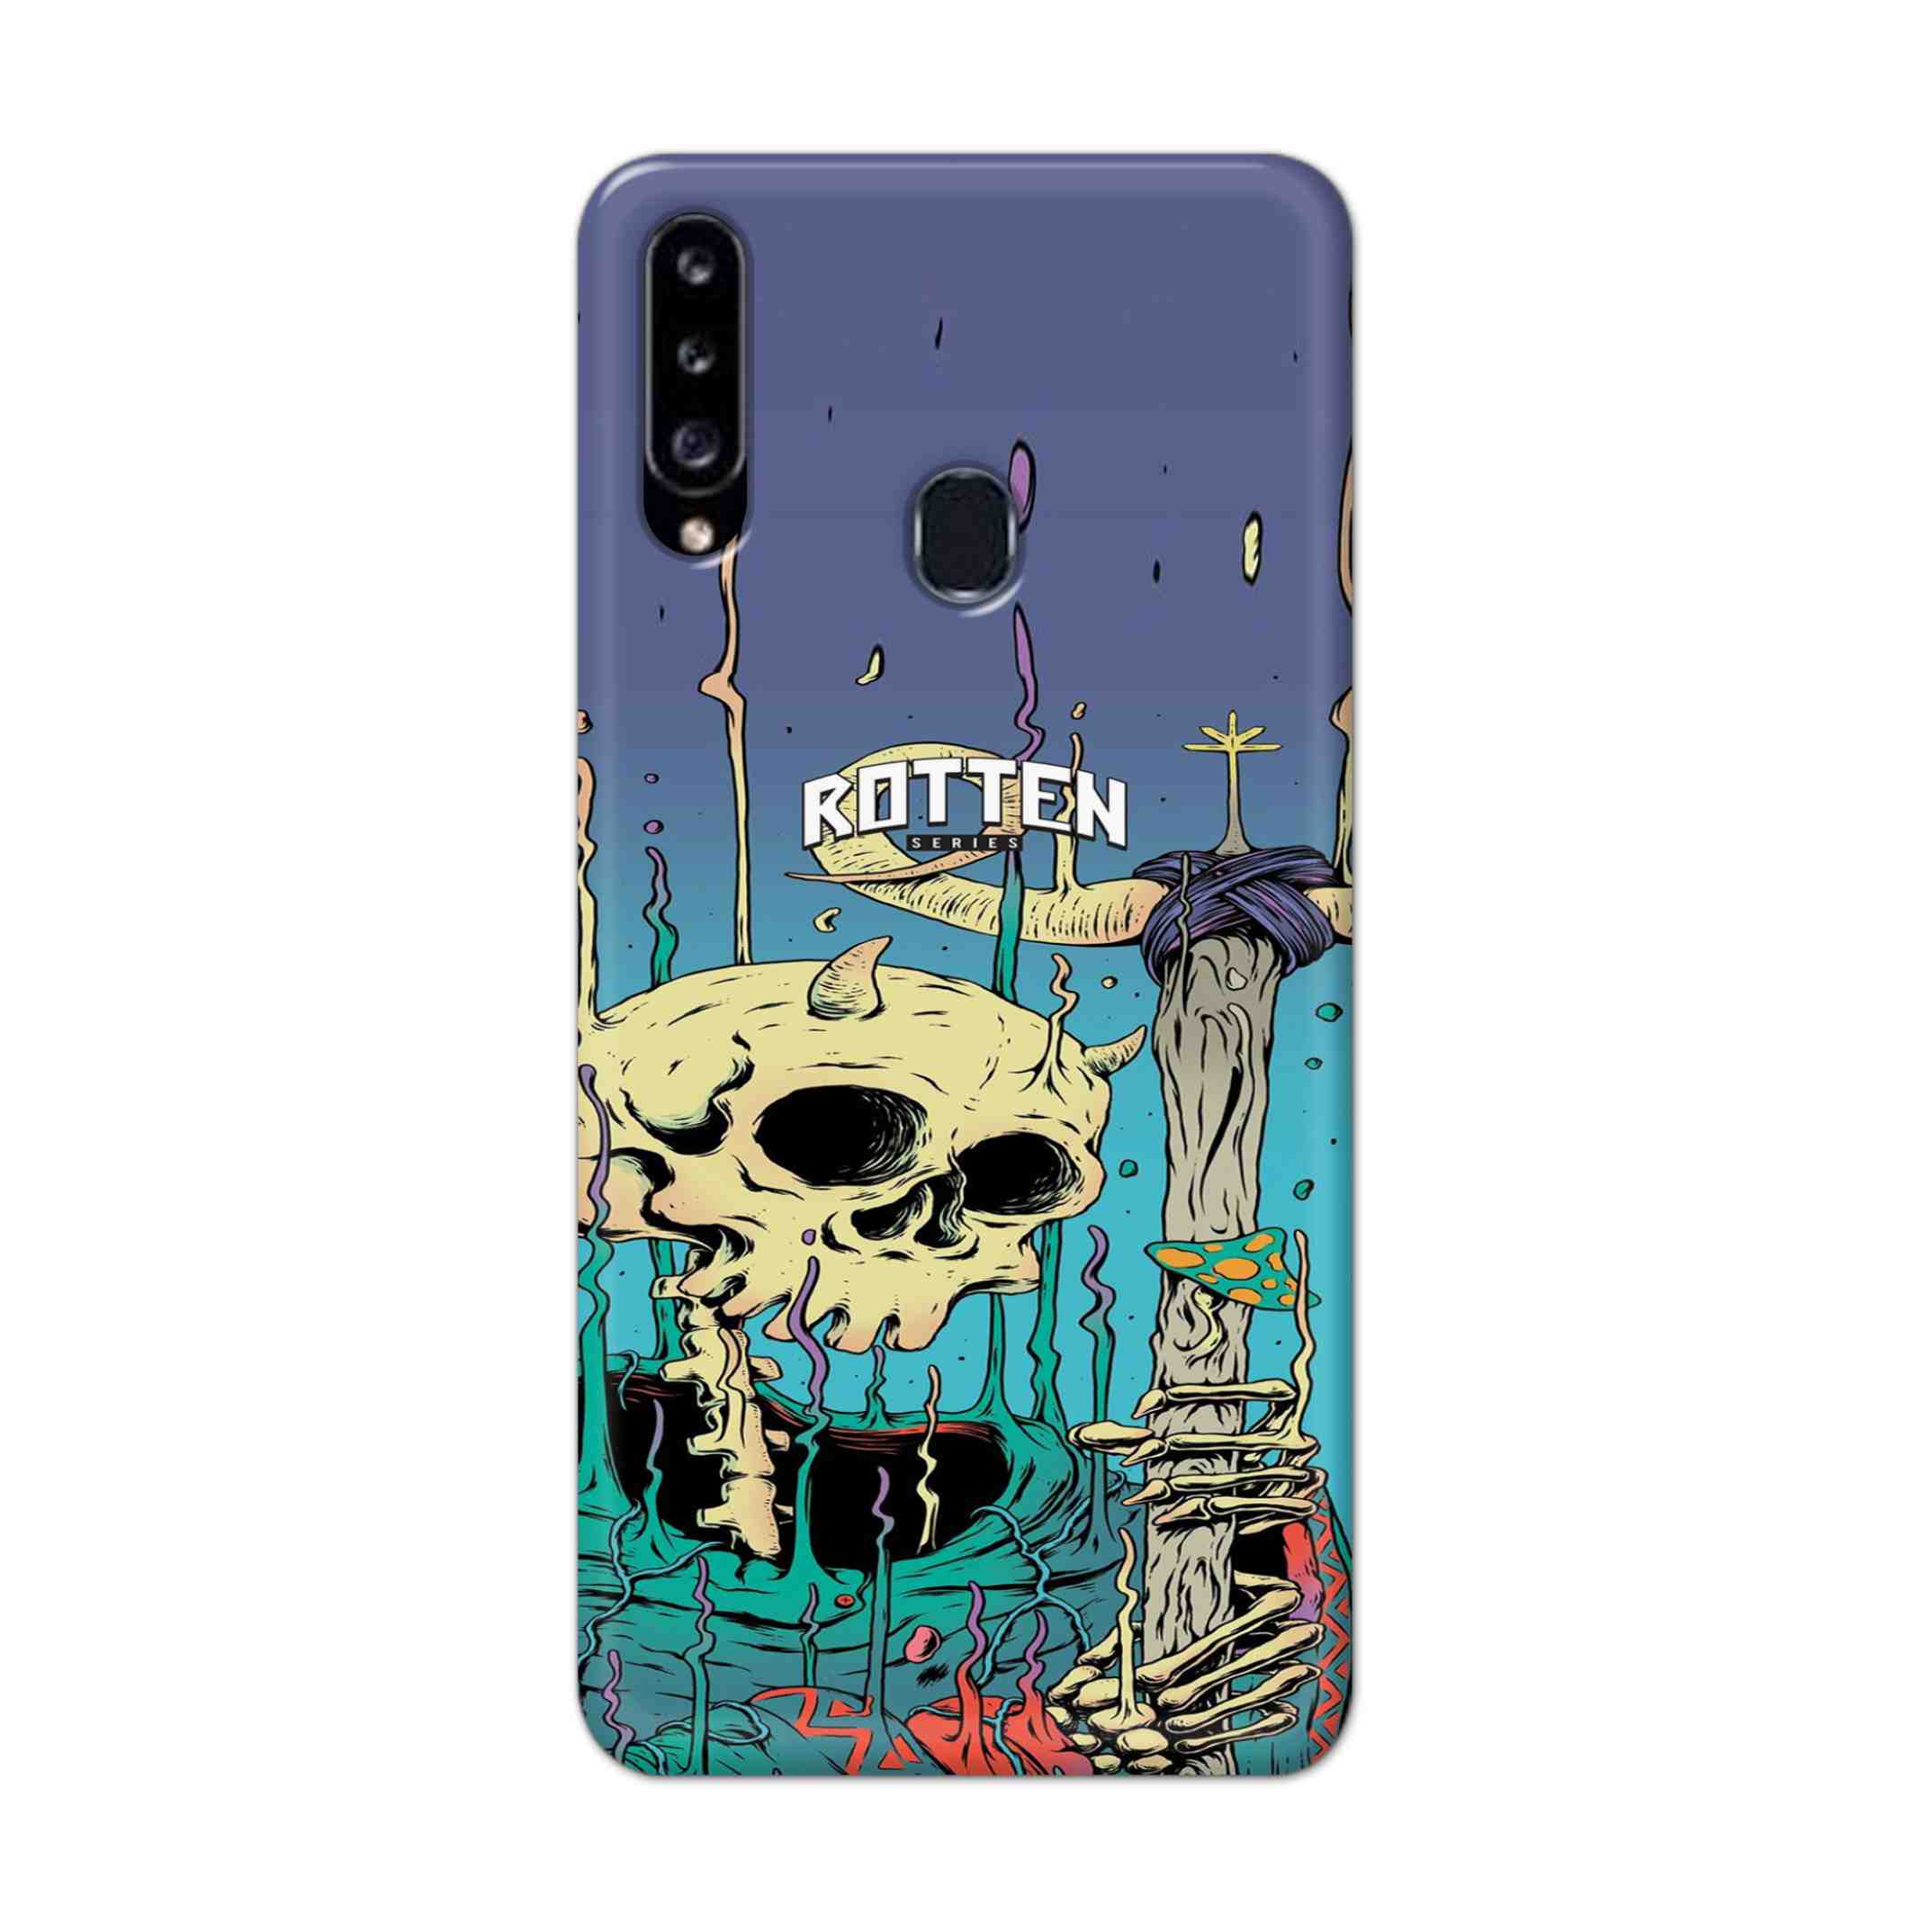 Buy Skull Hard Back Mobile Phone Case Cover For Samsung Galaxy A21 Online